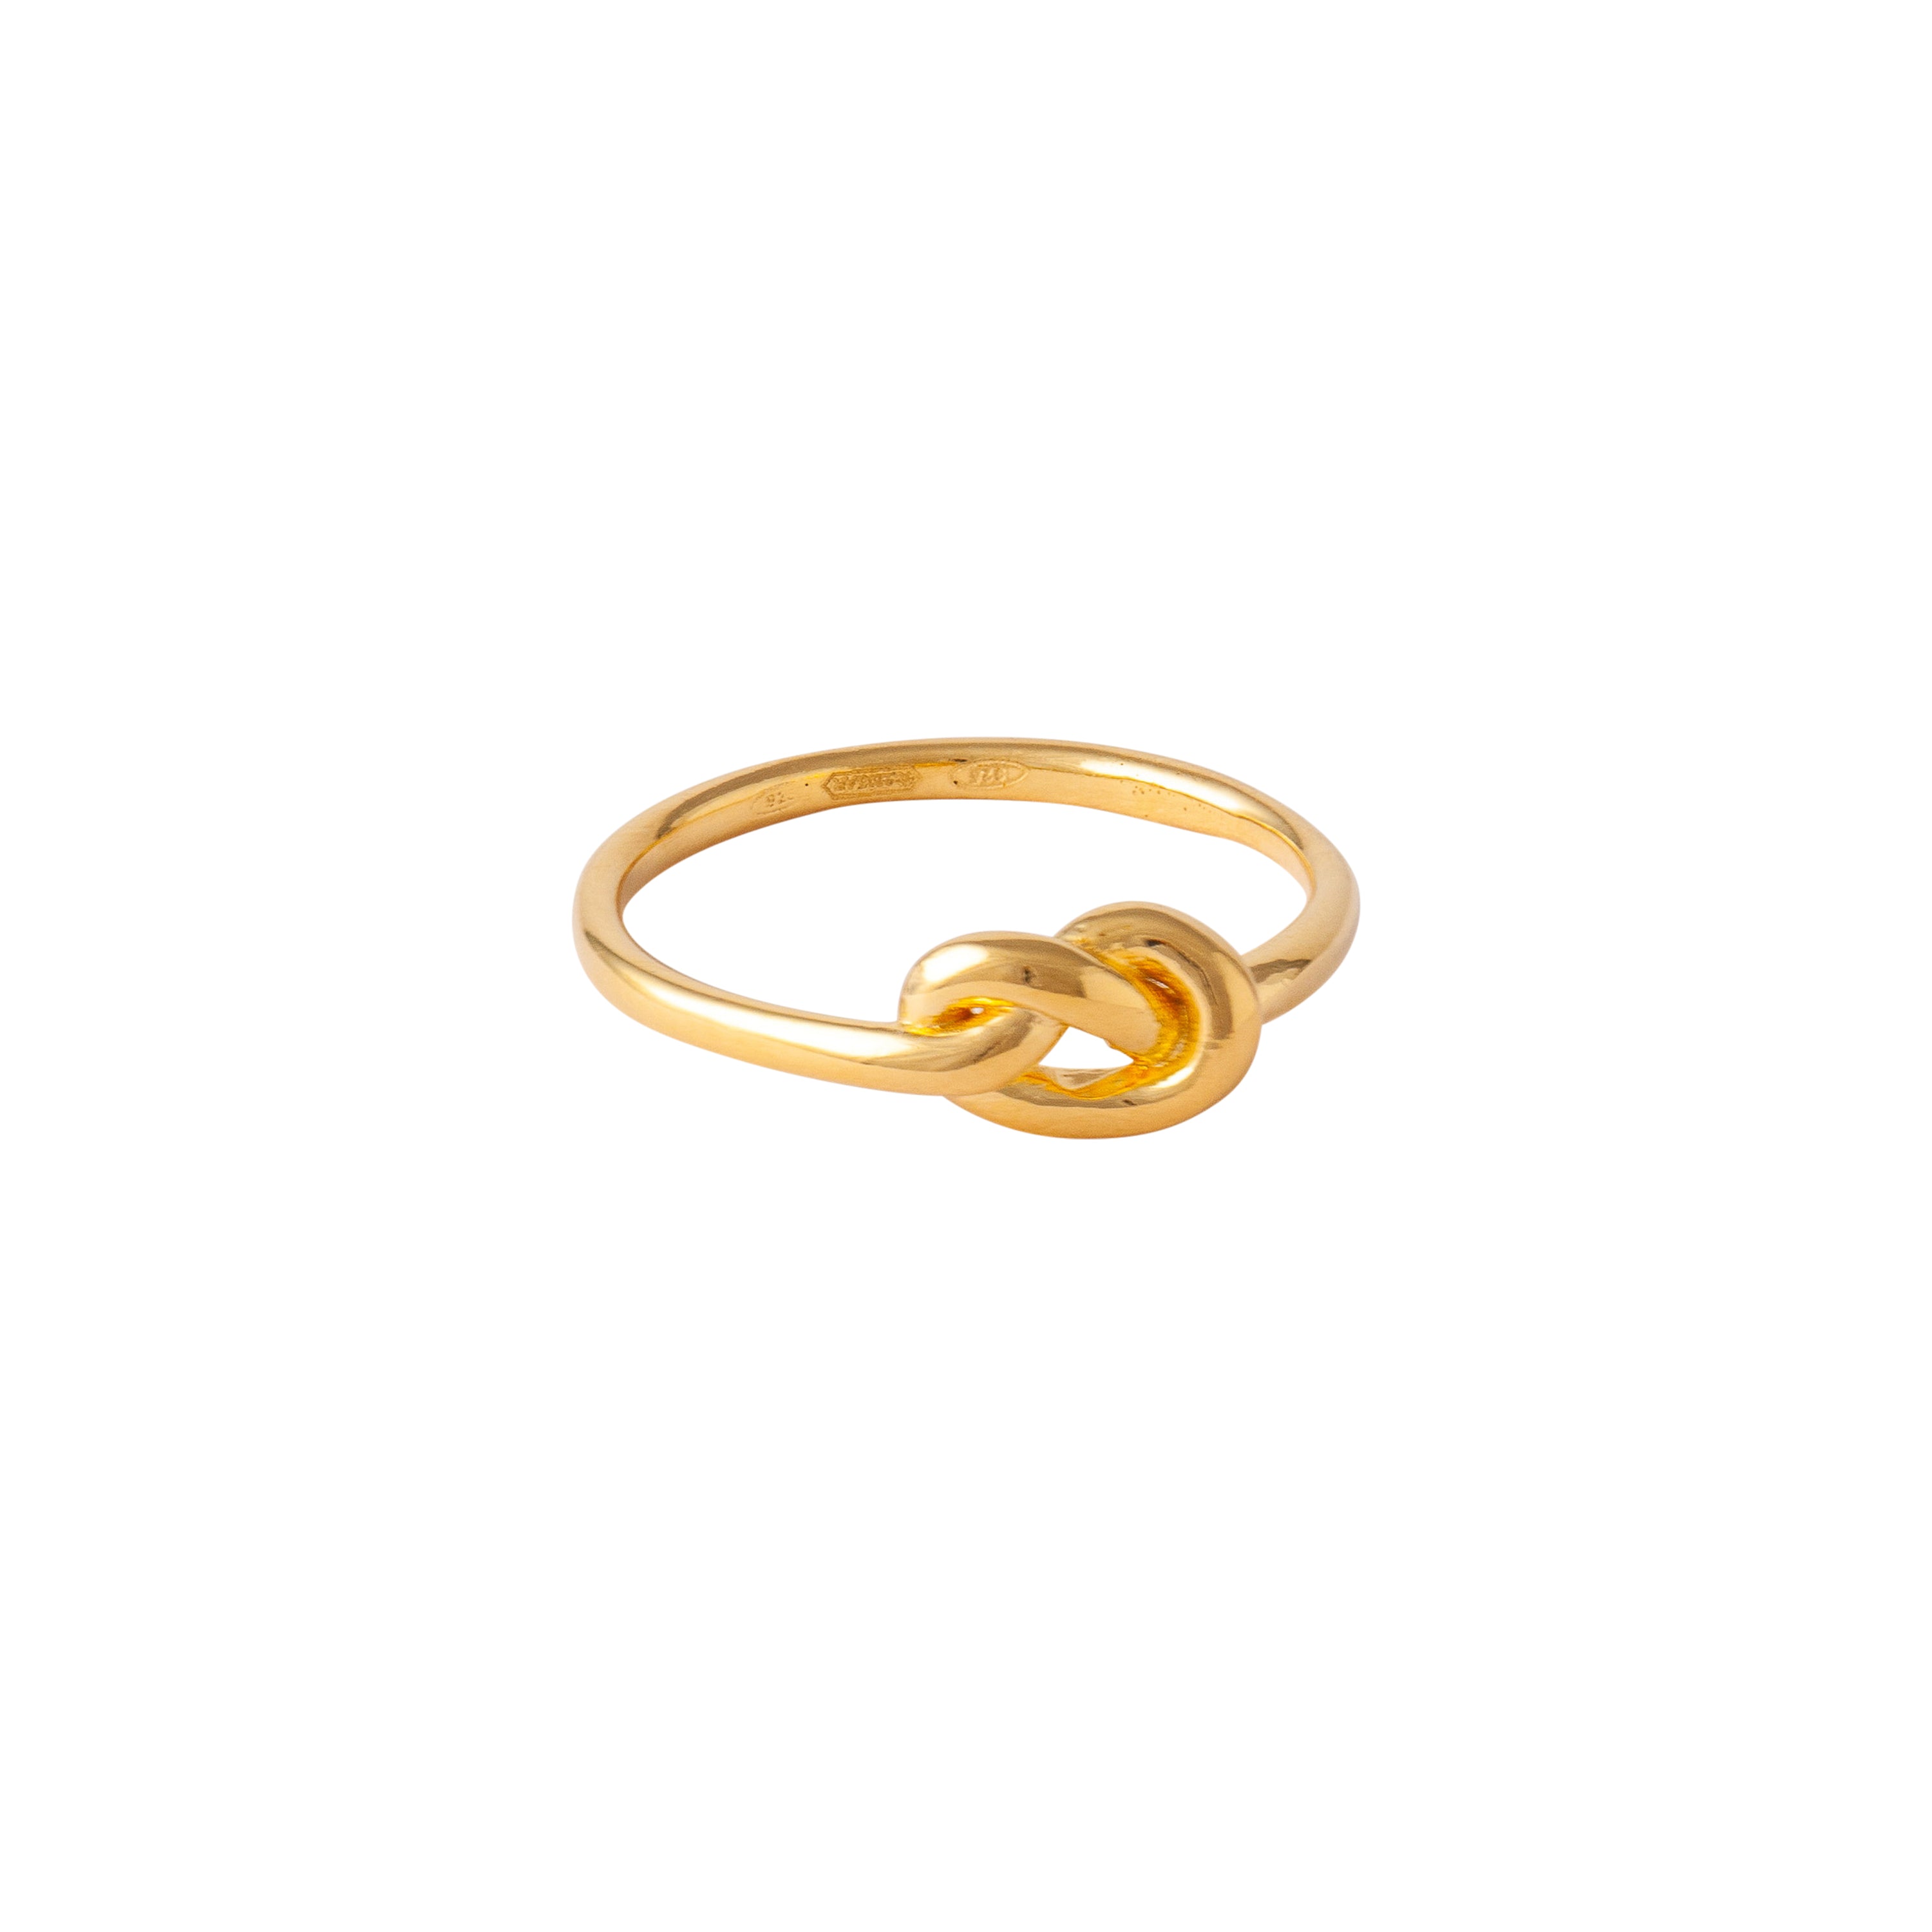 GOLD LOVE KNOT RING